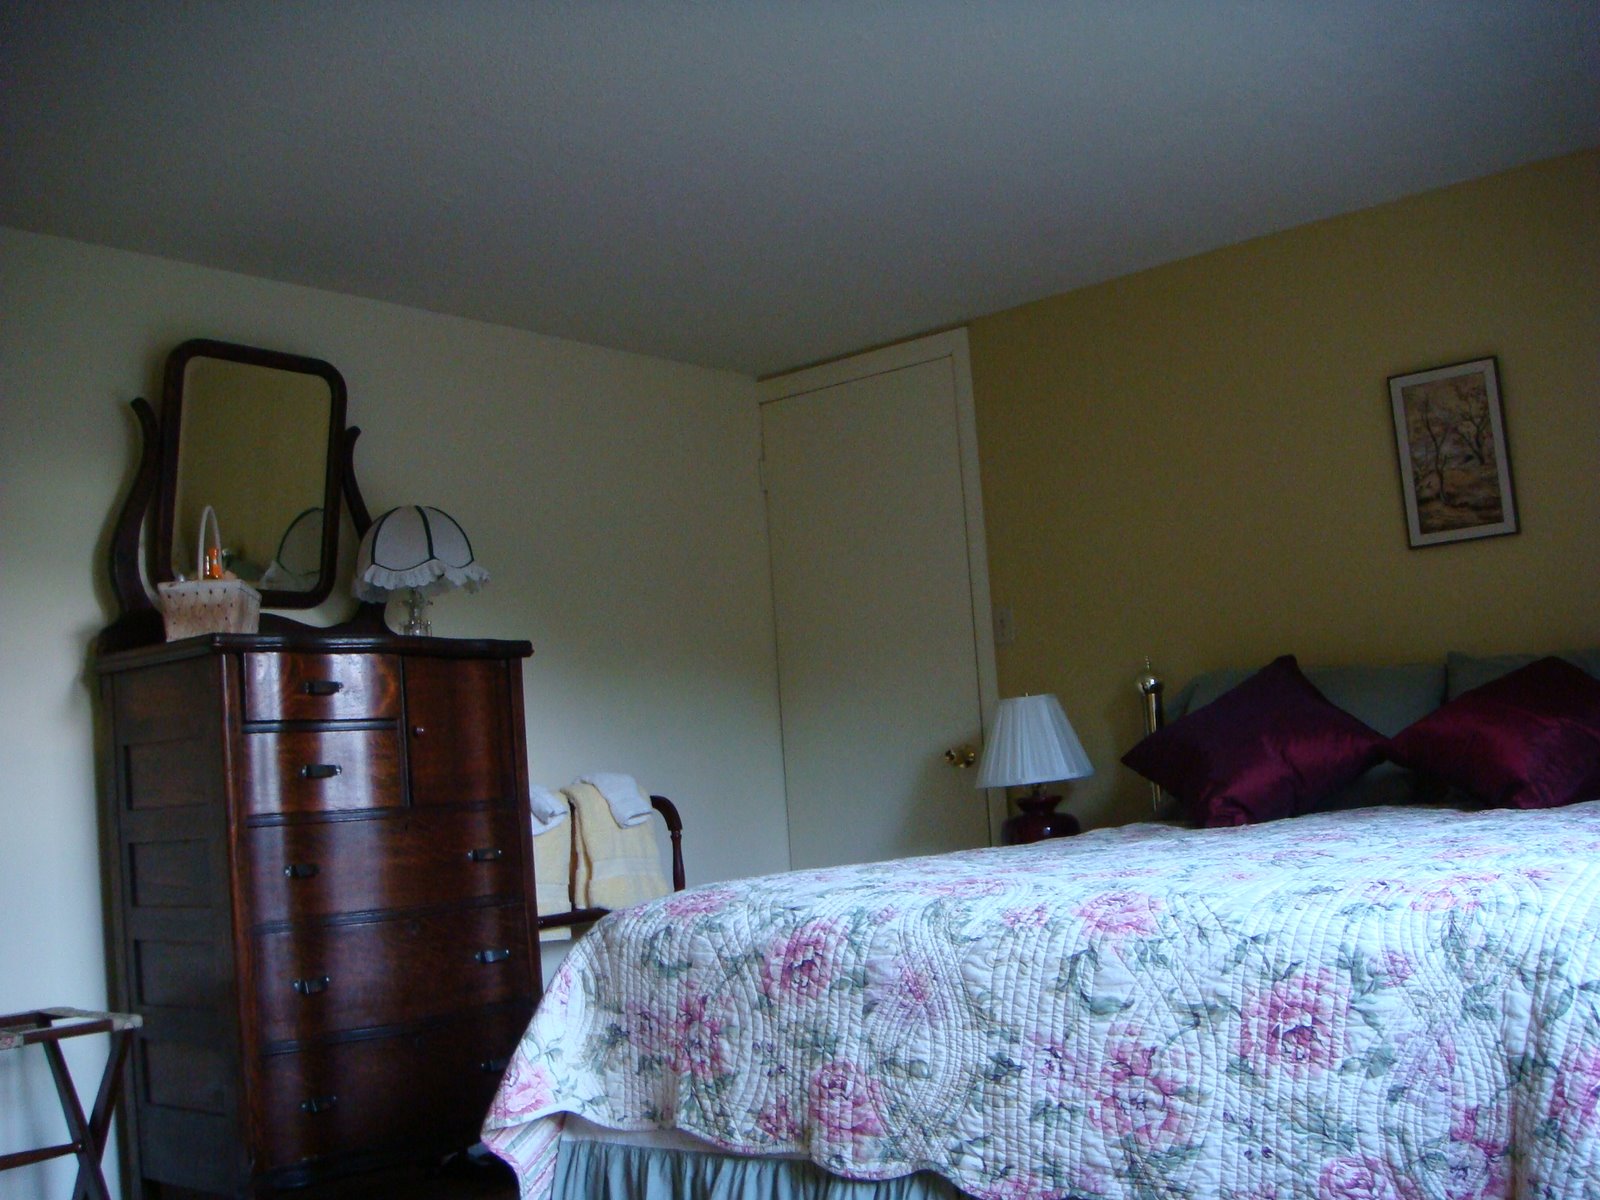 [rose+and+guest+bedroom+031.JPG]